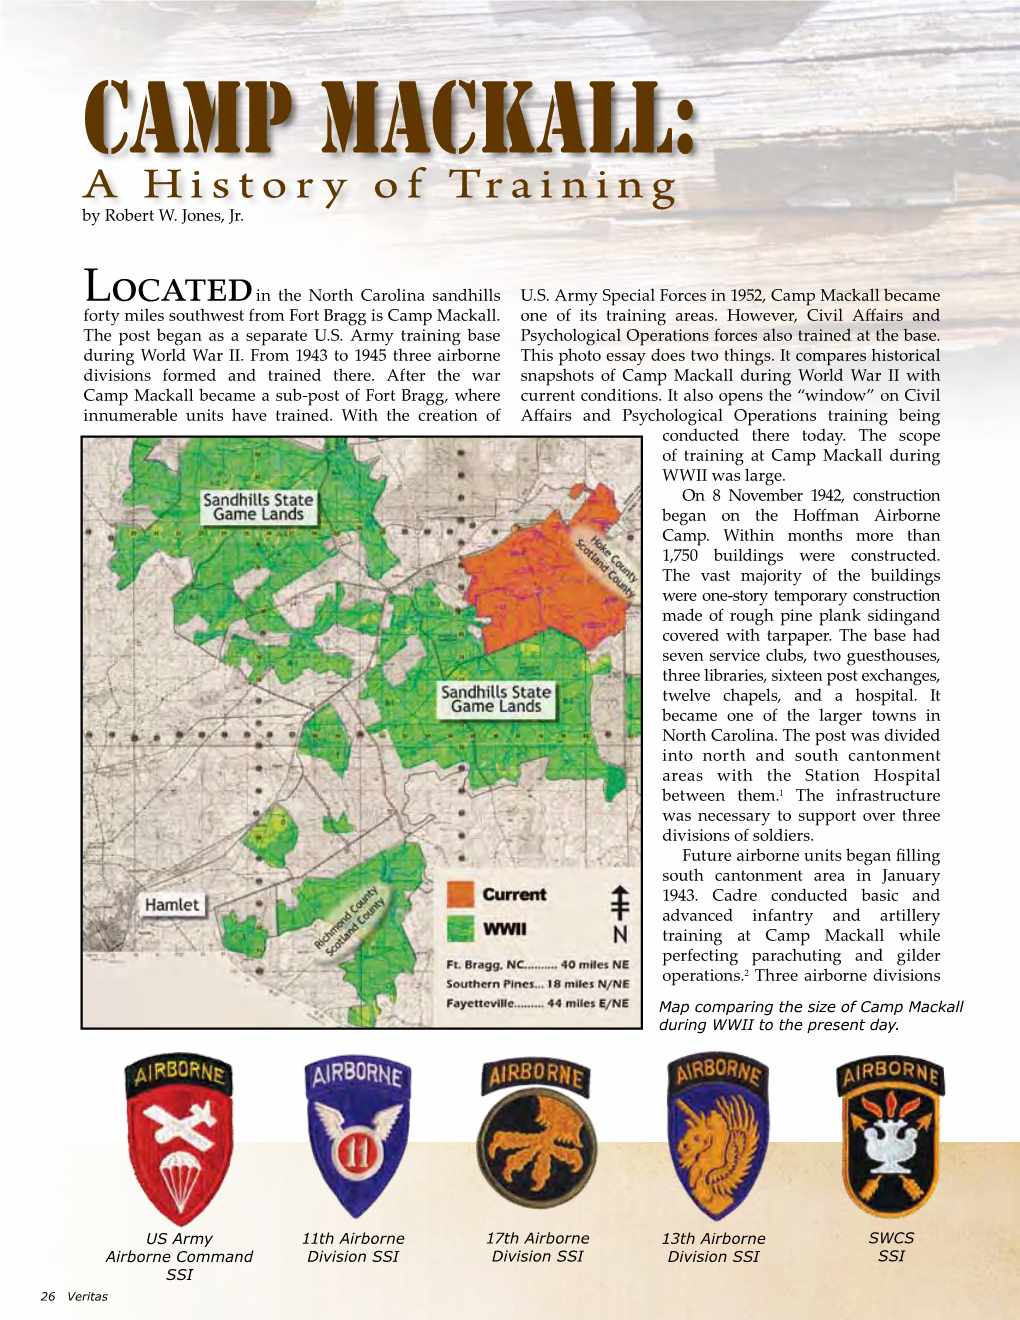 Camp Mackall: a History of Training by Robert W